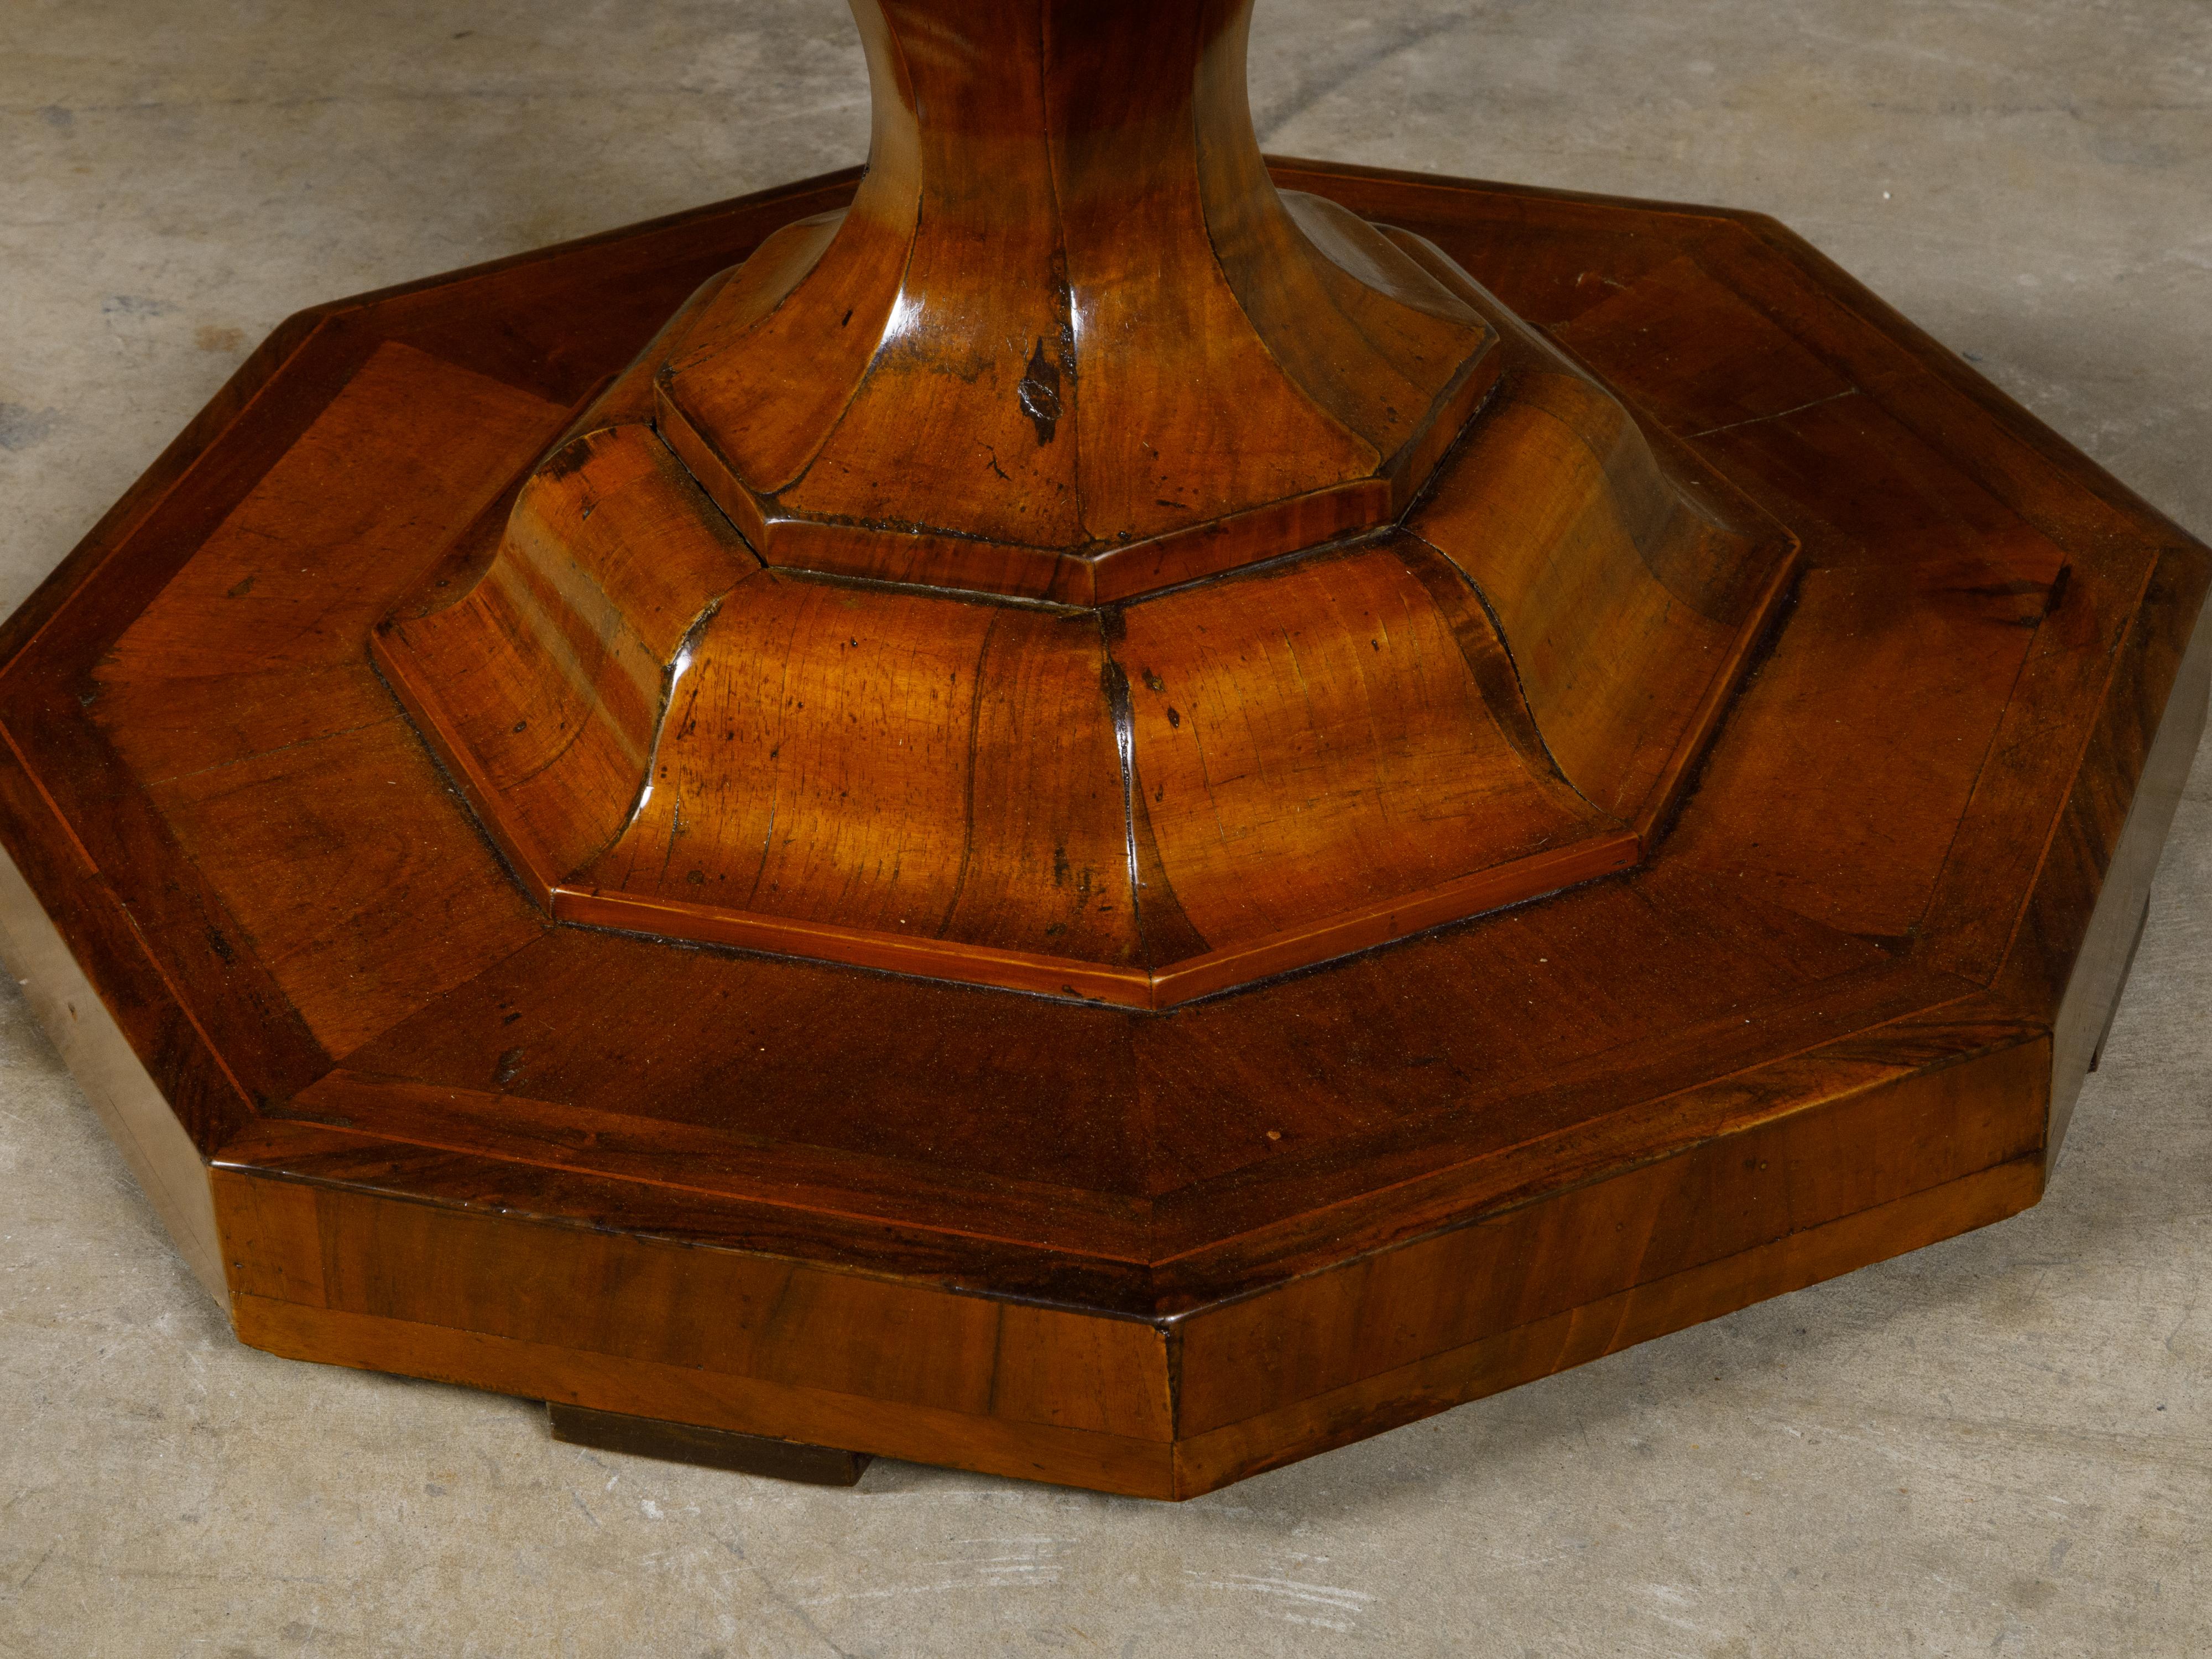 Biedermeier Period 19th Century Walnut Pedestal Table with Marquetry Top  For Sale 1